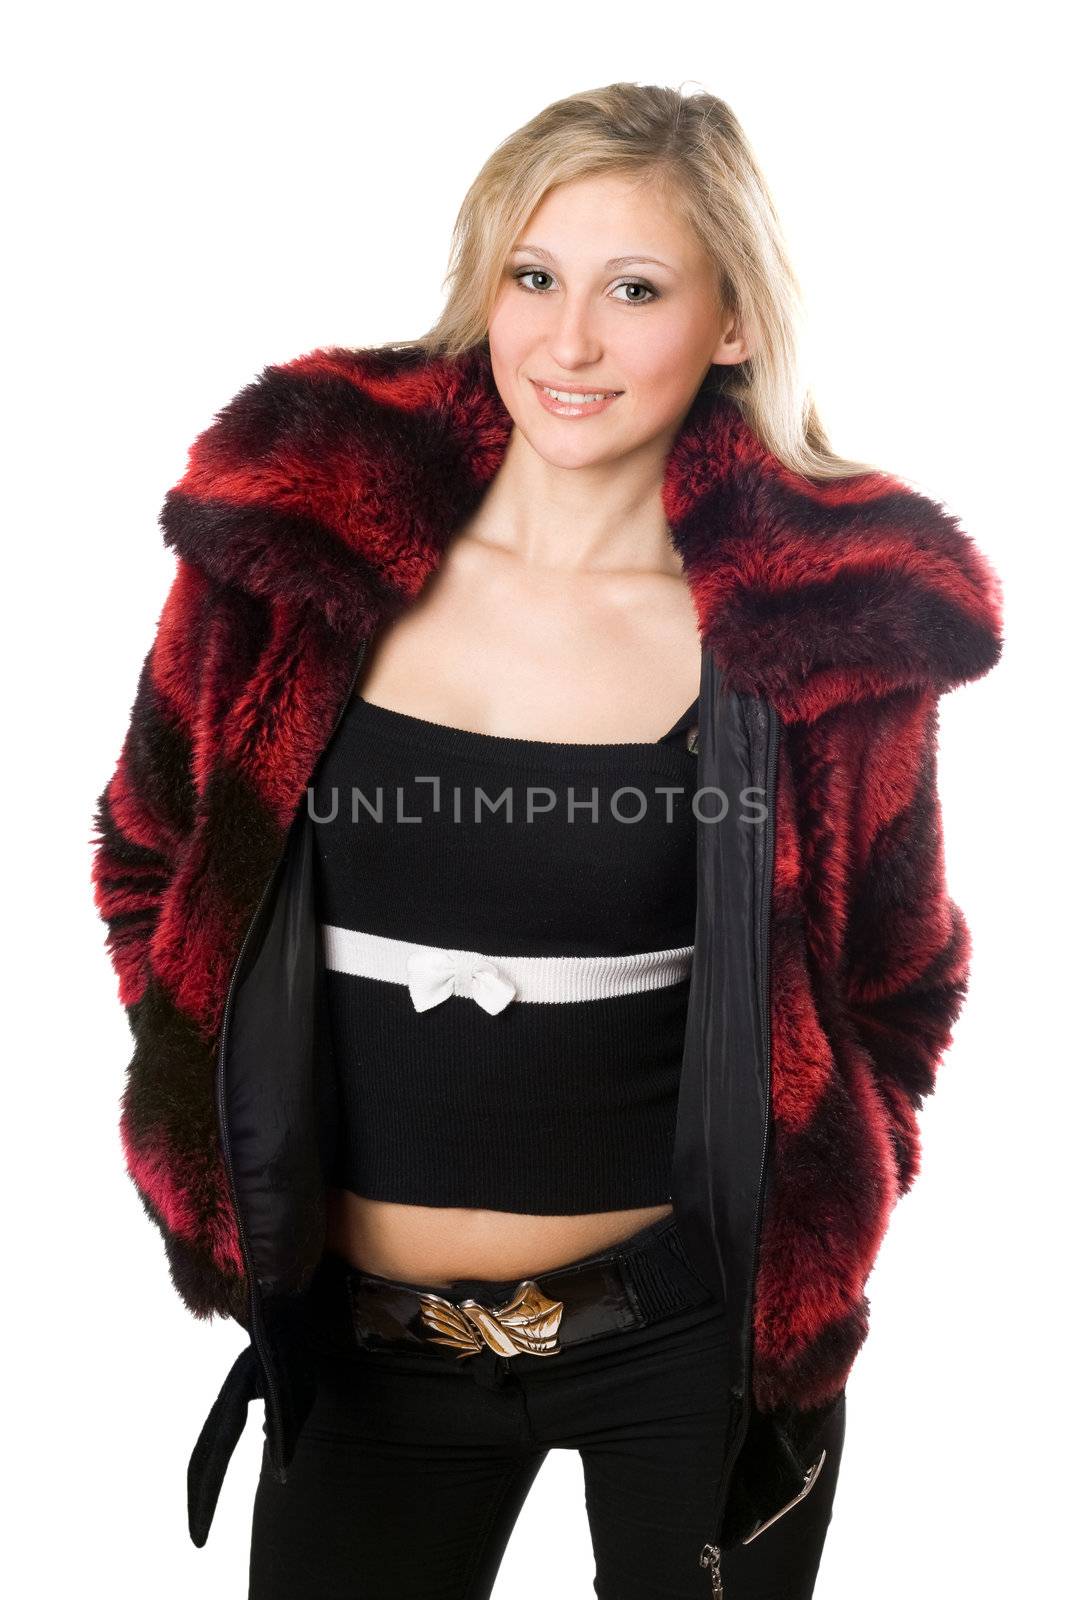 Smiling young blond woman in a fur jacket by acidgrey